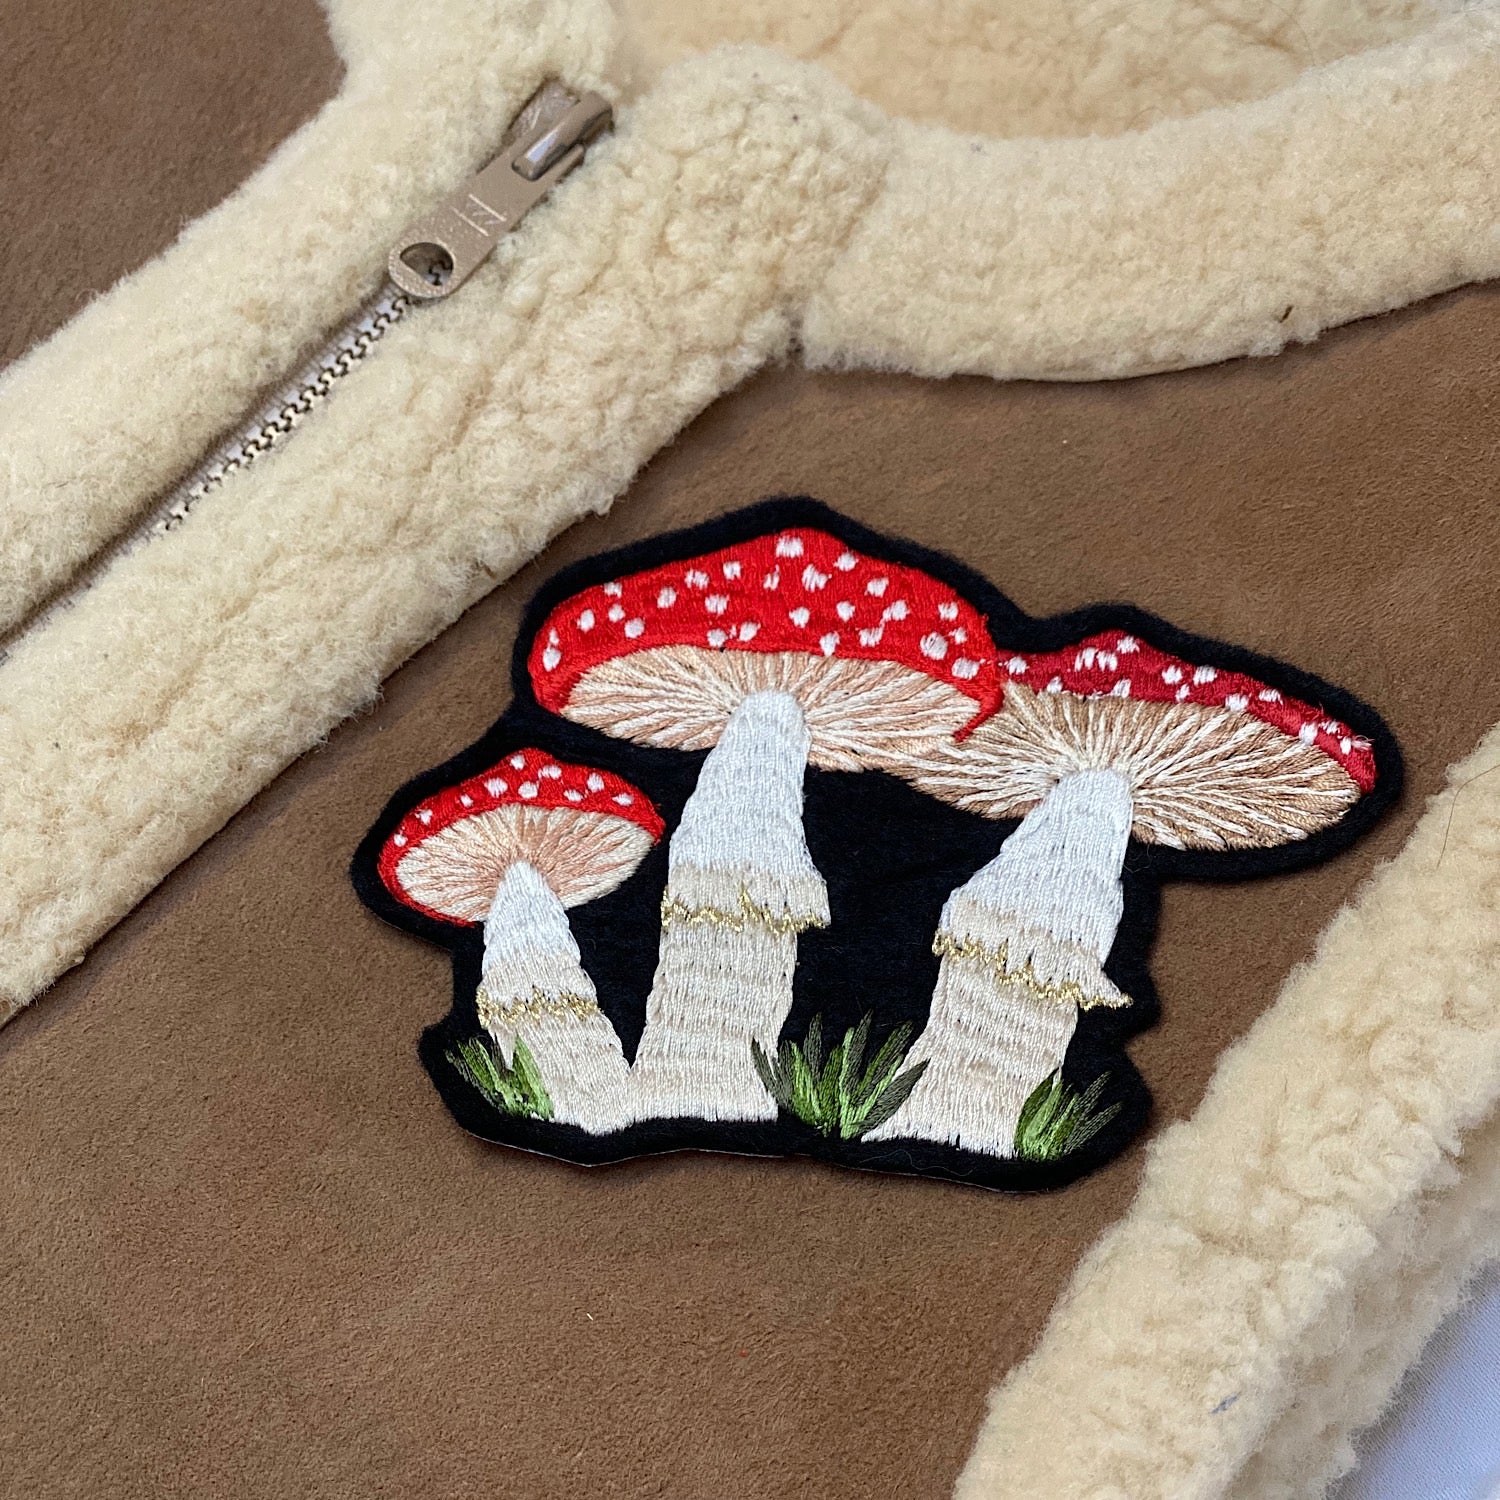 Embroidered mushroom patch on an item of clothing